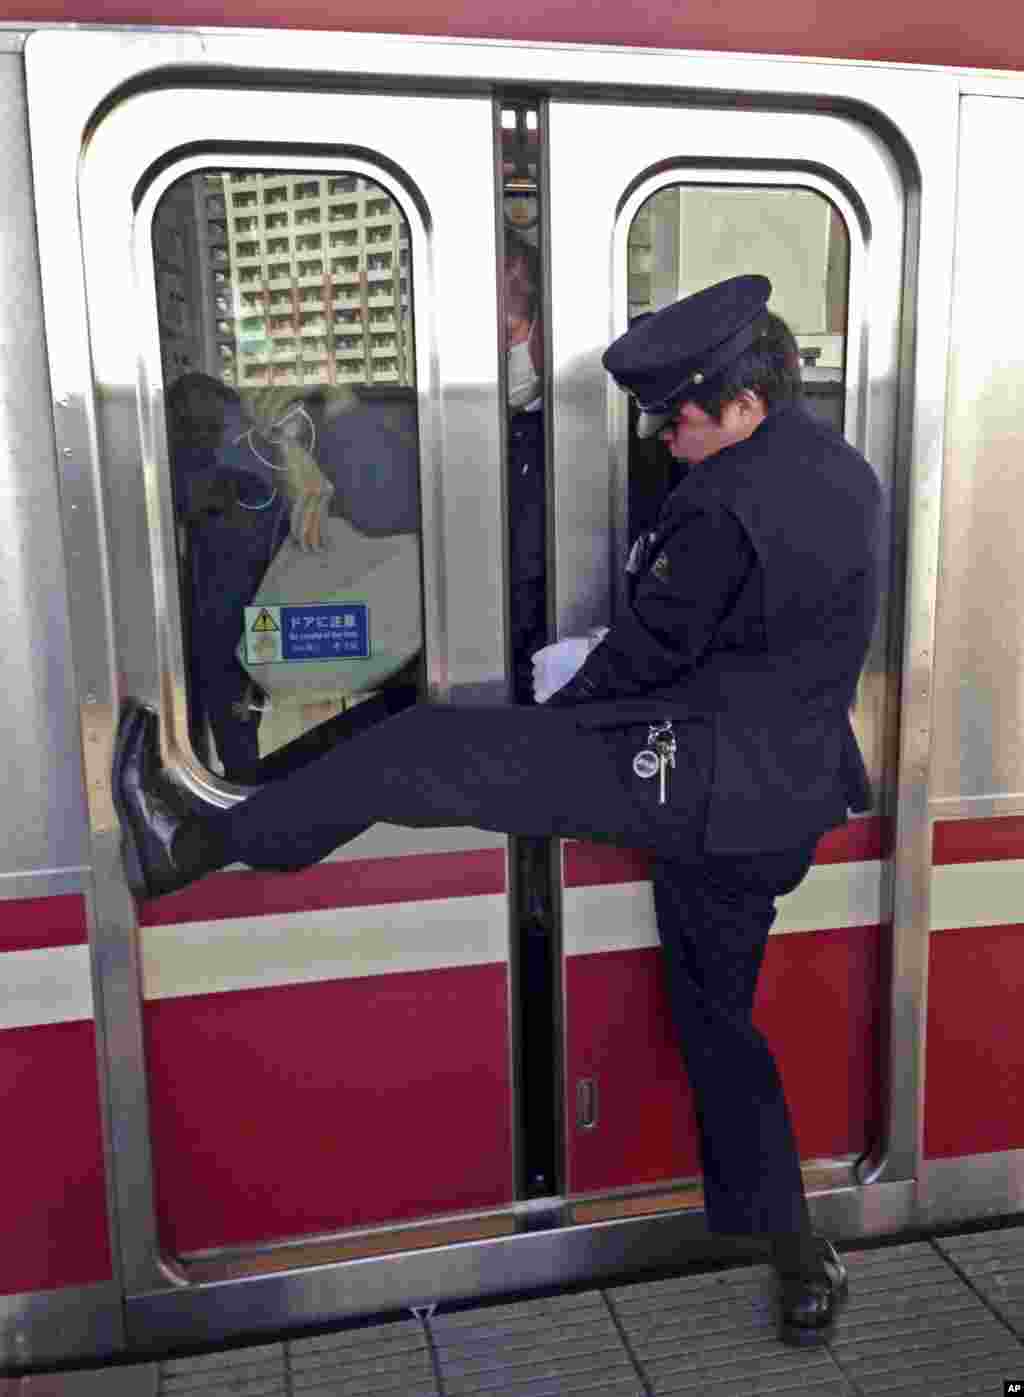 A station attendant attempts to open a door for a passenger trying to get in a train at a station in Kawasaki near Tokyo, Japan, during a morning rush hour, March 30, 2015. &nbsp;